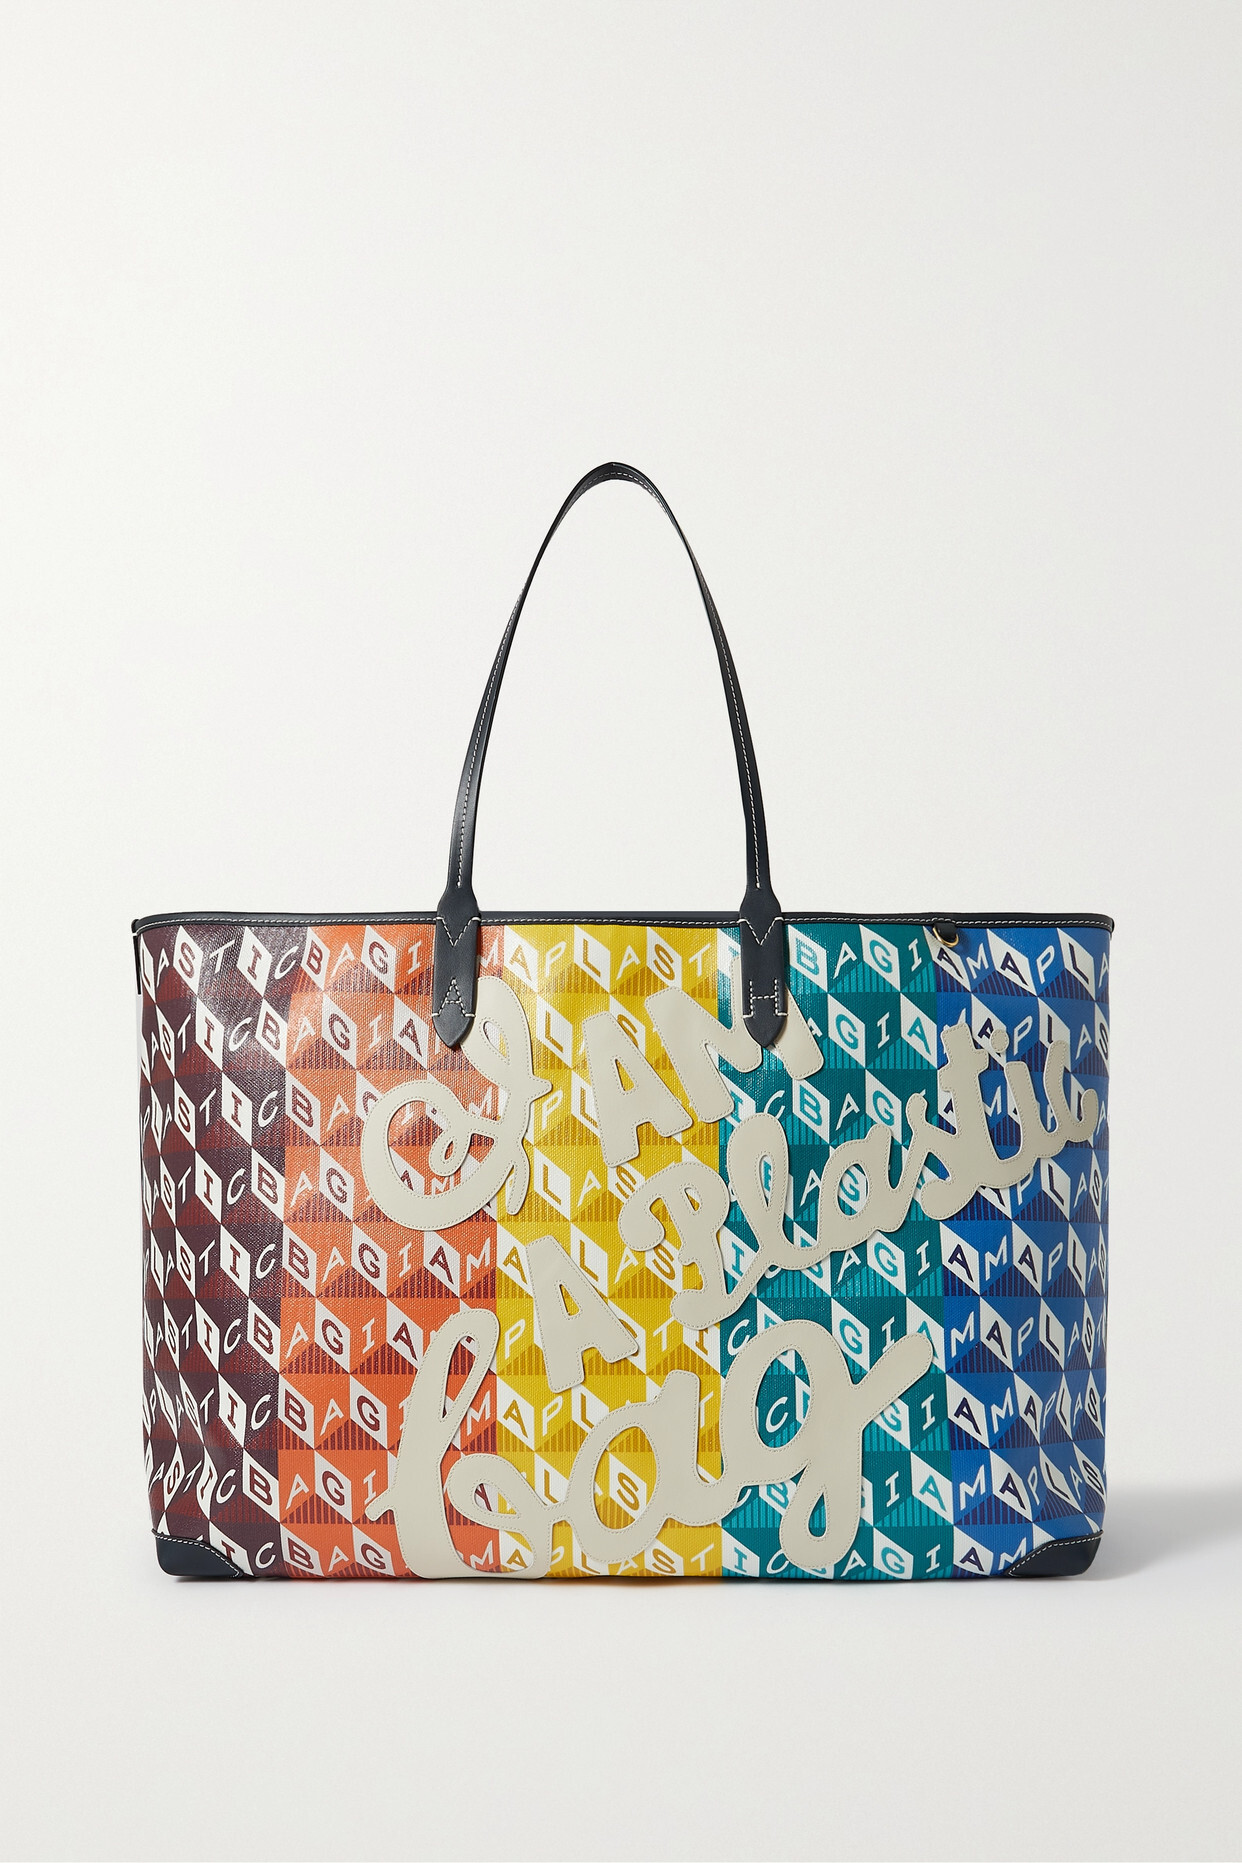 Anya Hindmarch - + Net Sustain I Am A Plastic Bag Xl Leather-trimmed Recycled Coated-canvas Tote - Yellow